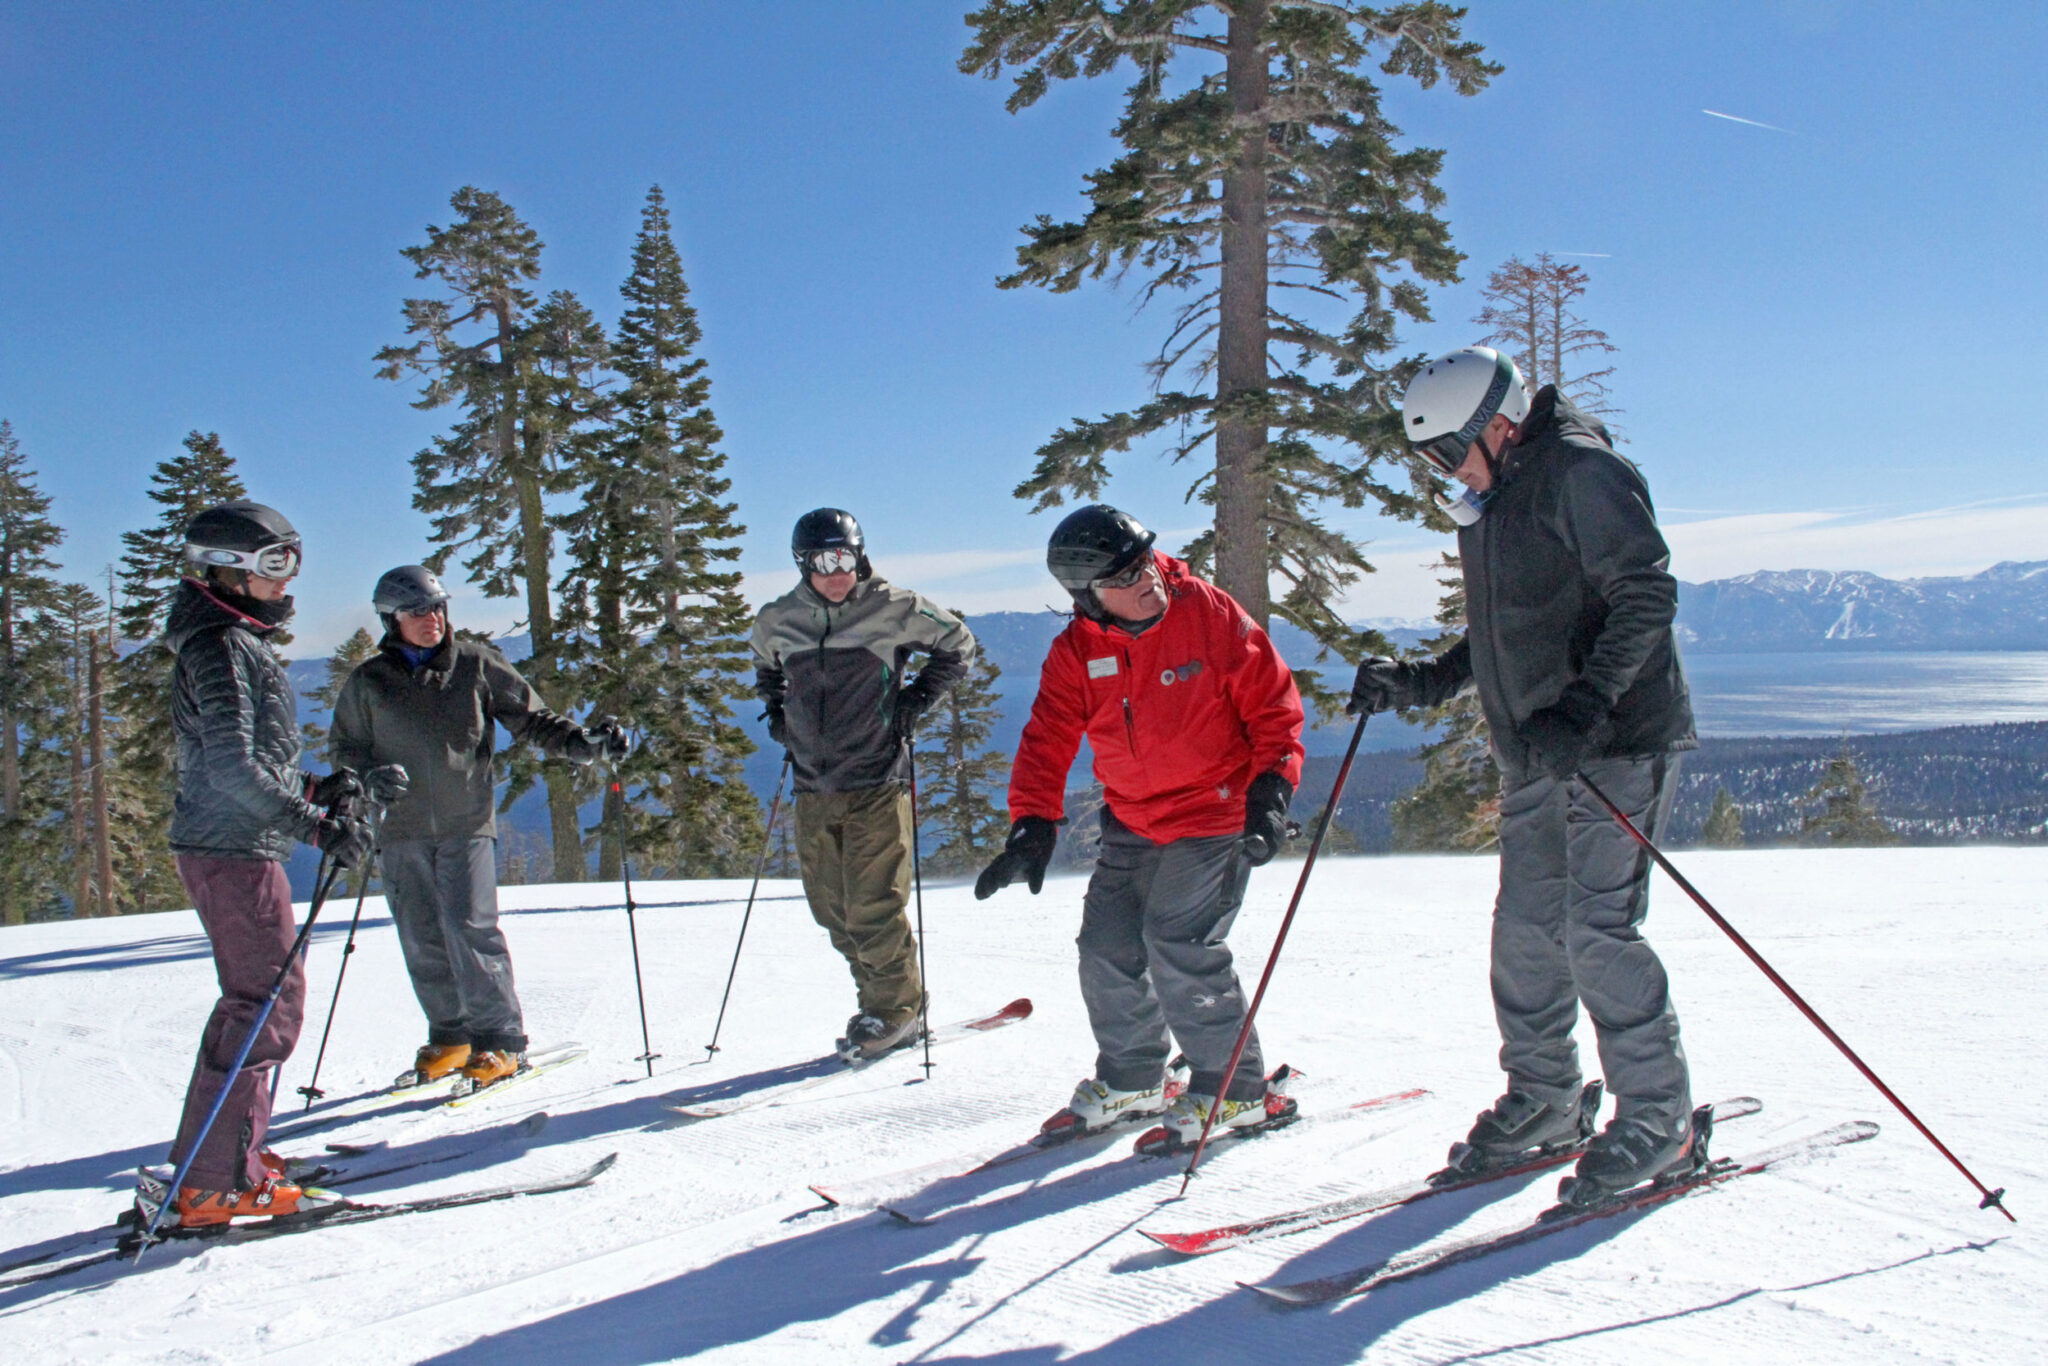 Instructor teaching a group ski lesson